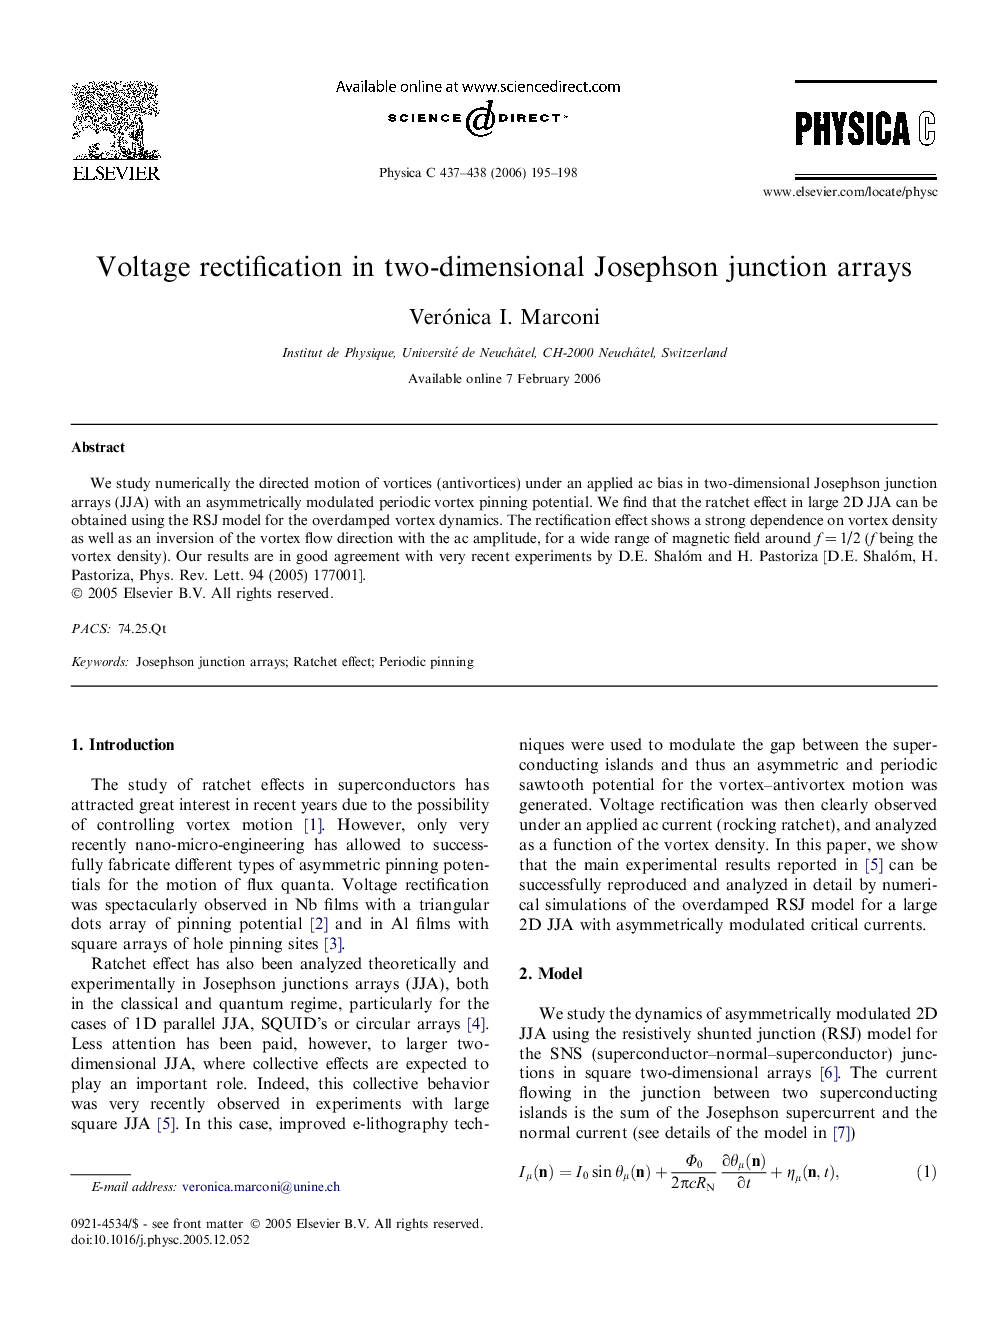 Voltage rectification in two-dimensional Josephson junction arrays